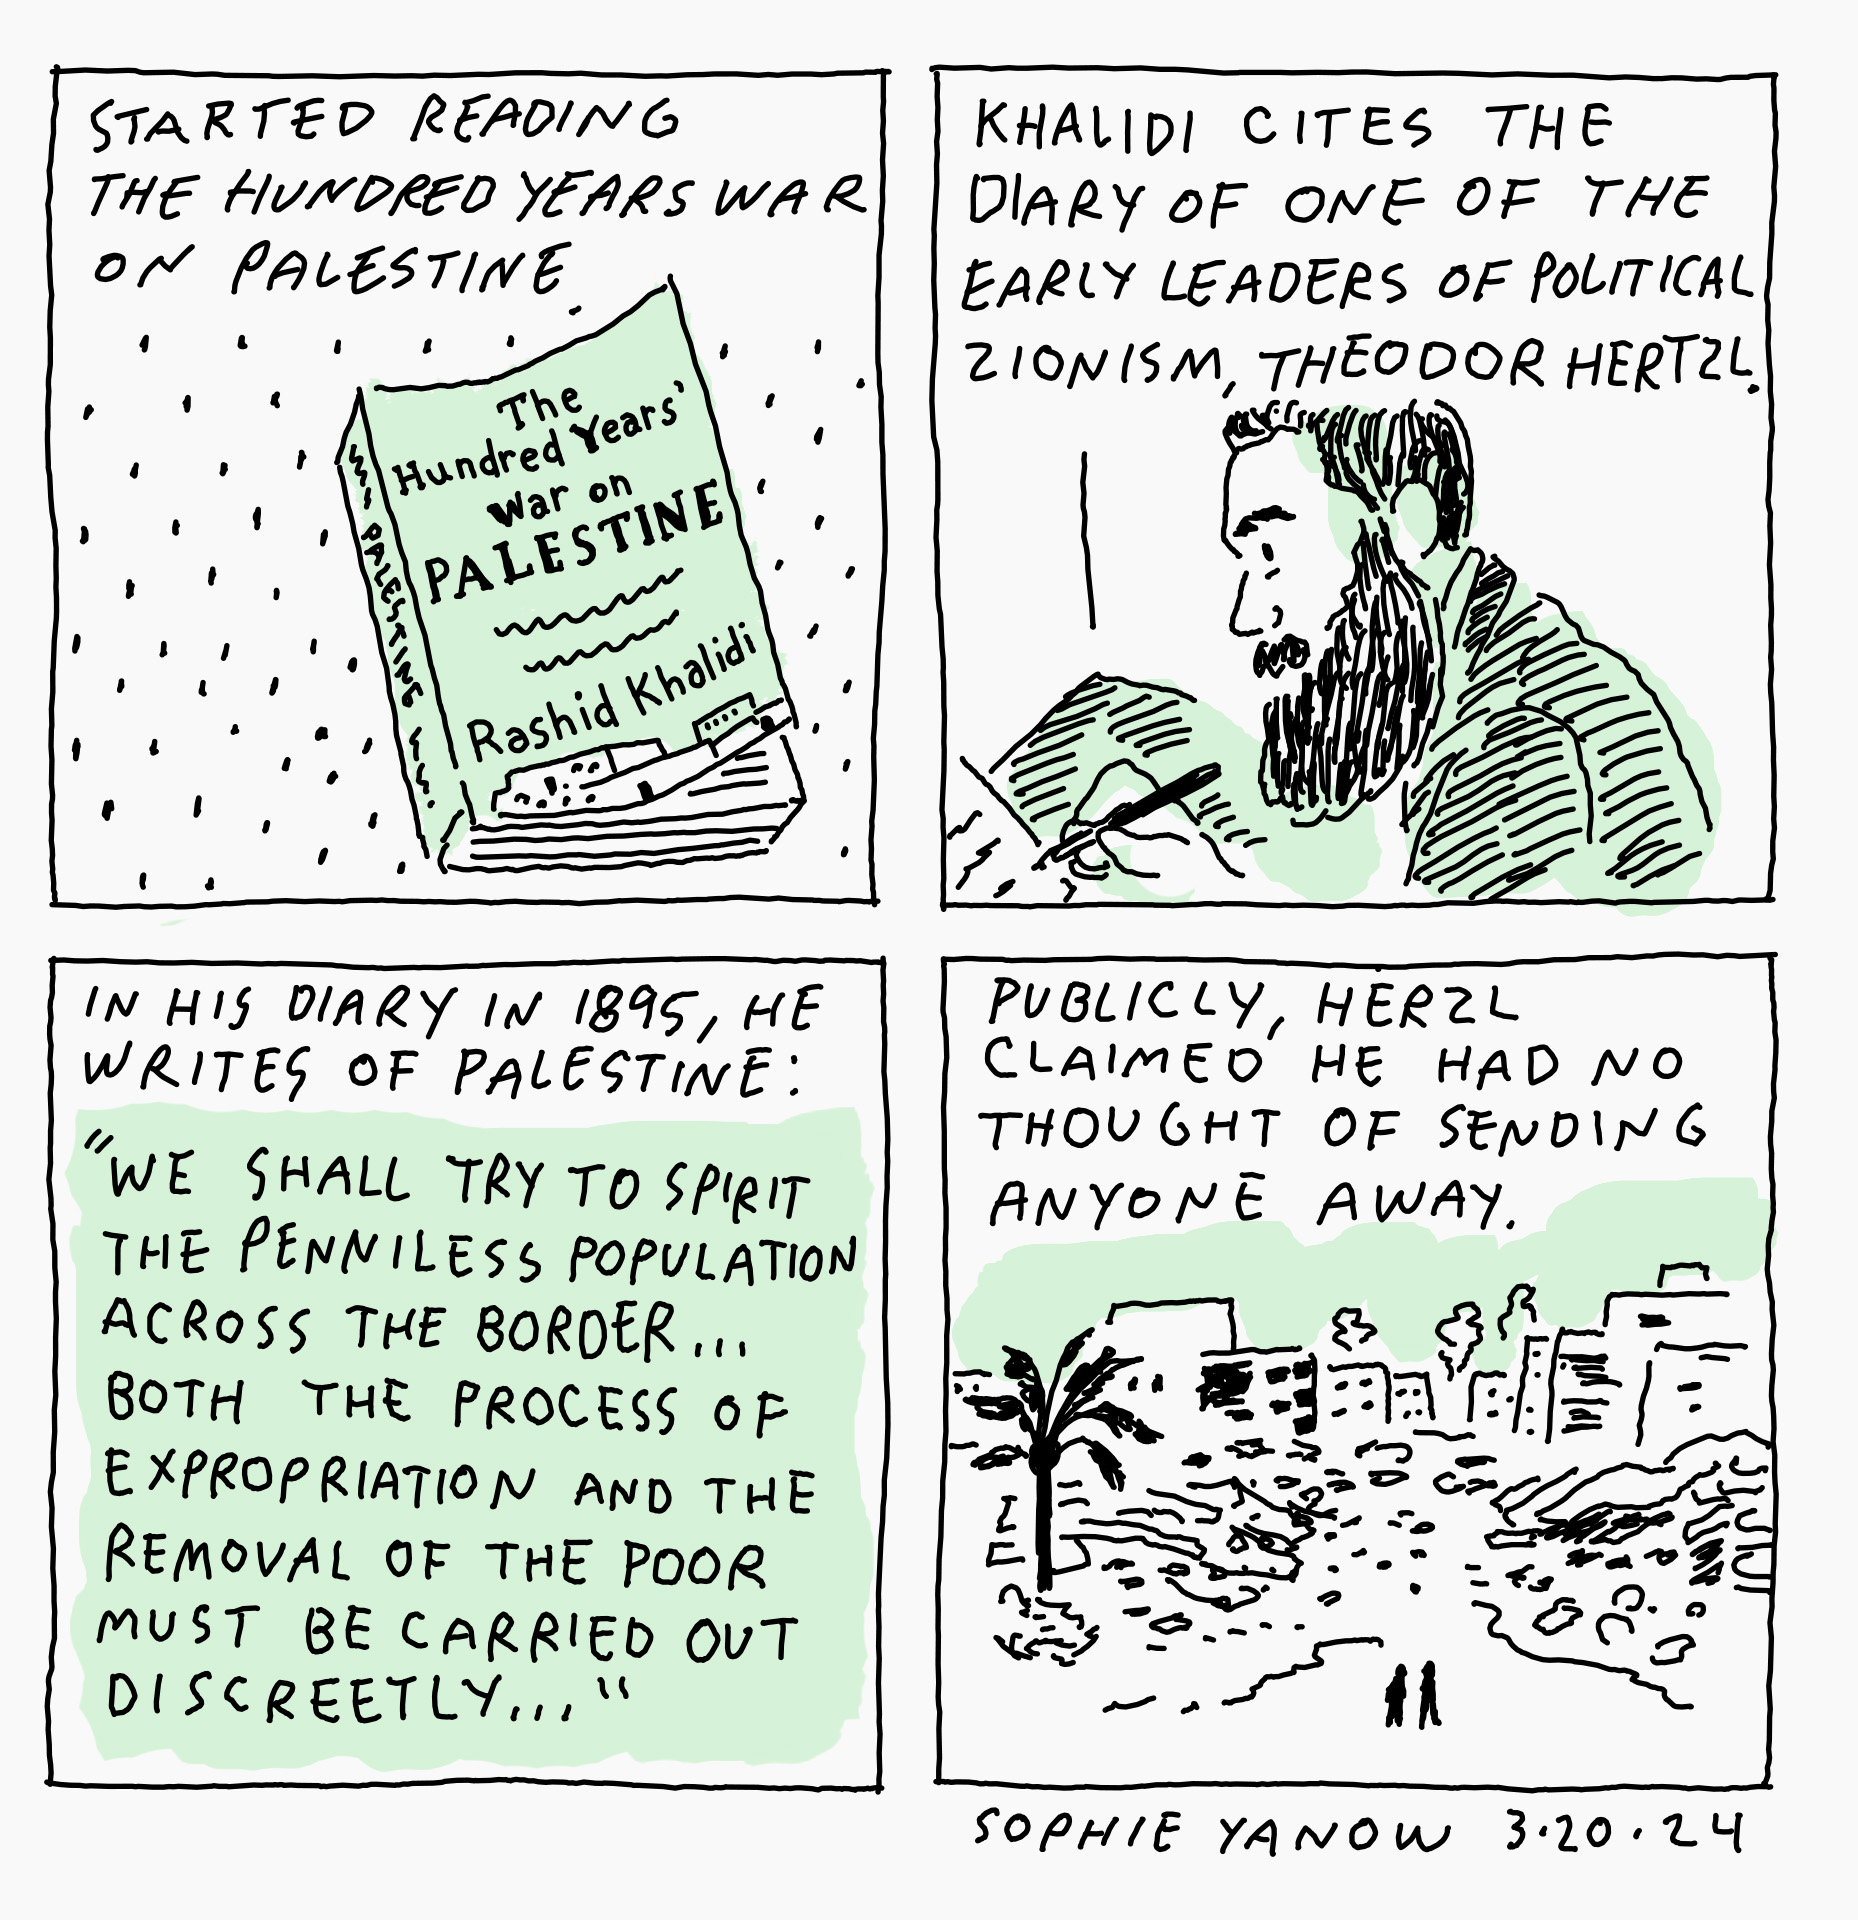 A comic about Theodor Herzl.